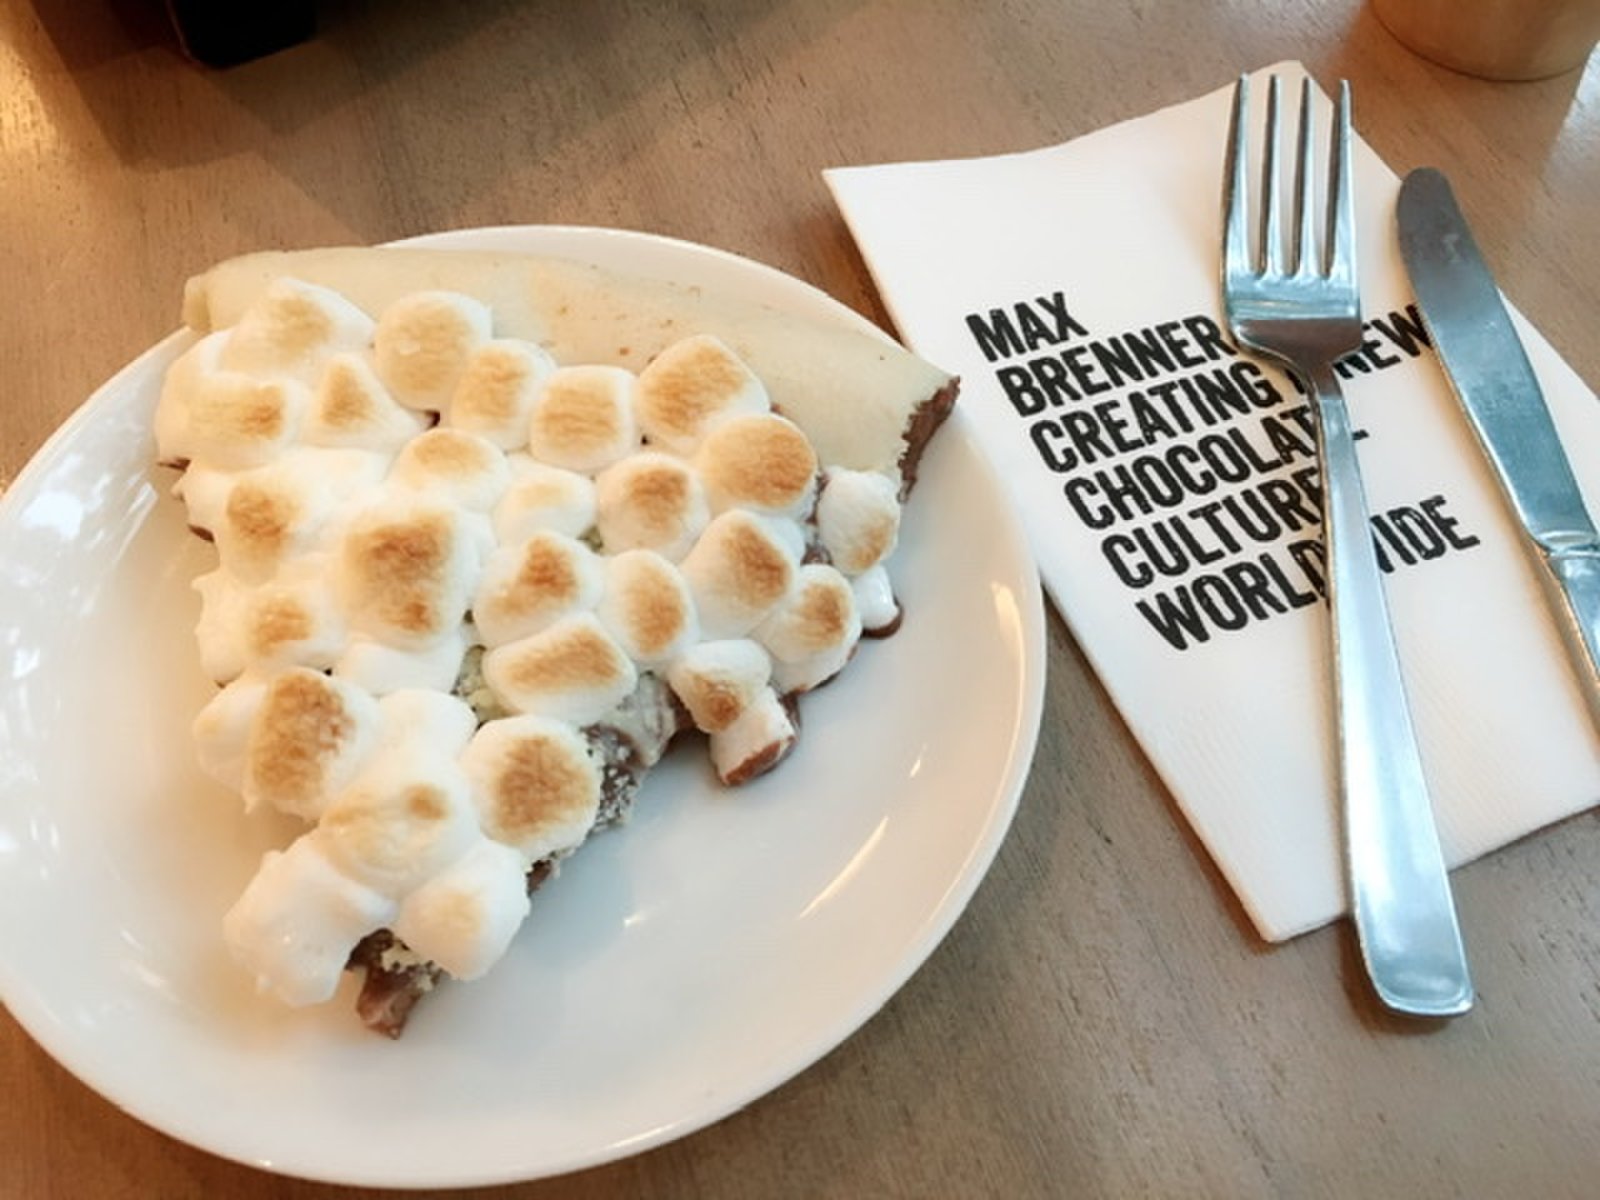 MAX BRENNER CHOCOLATE PIZZA BAR ラフォーレ原宿店